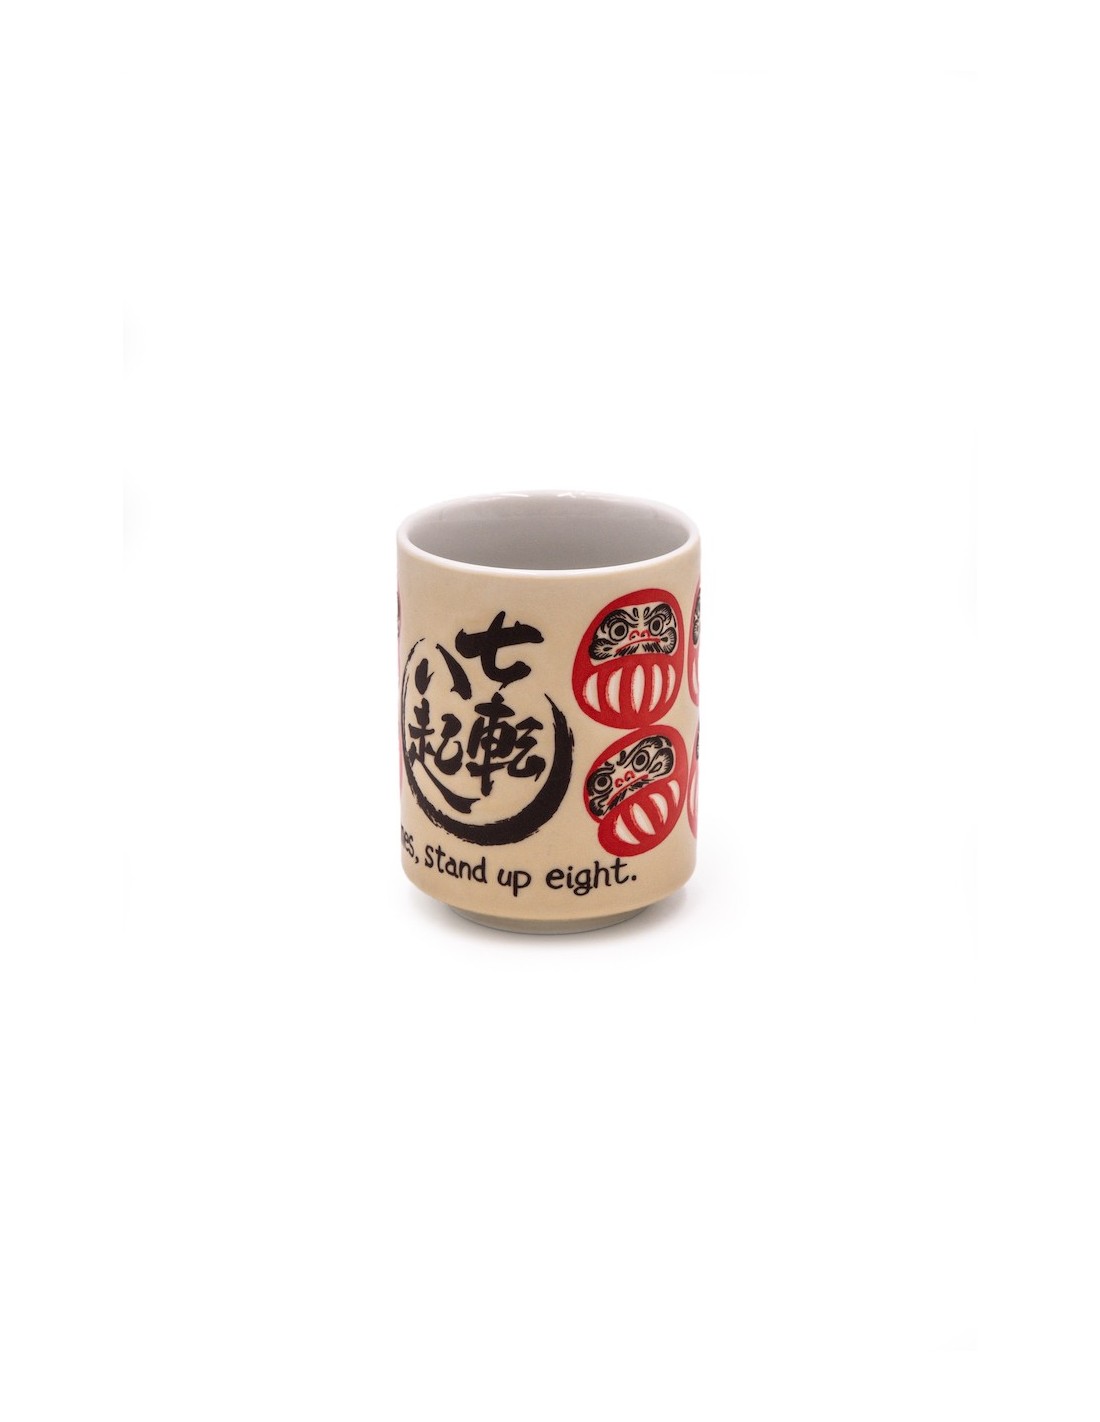 stand up eight." Made in Japan Japanese Tea Sushi Cup Daruma "Fall seven times 